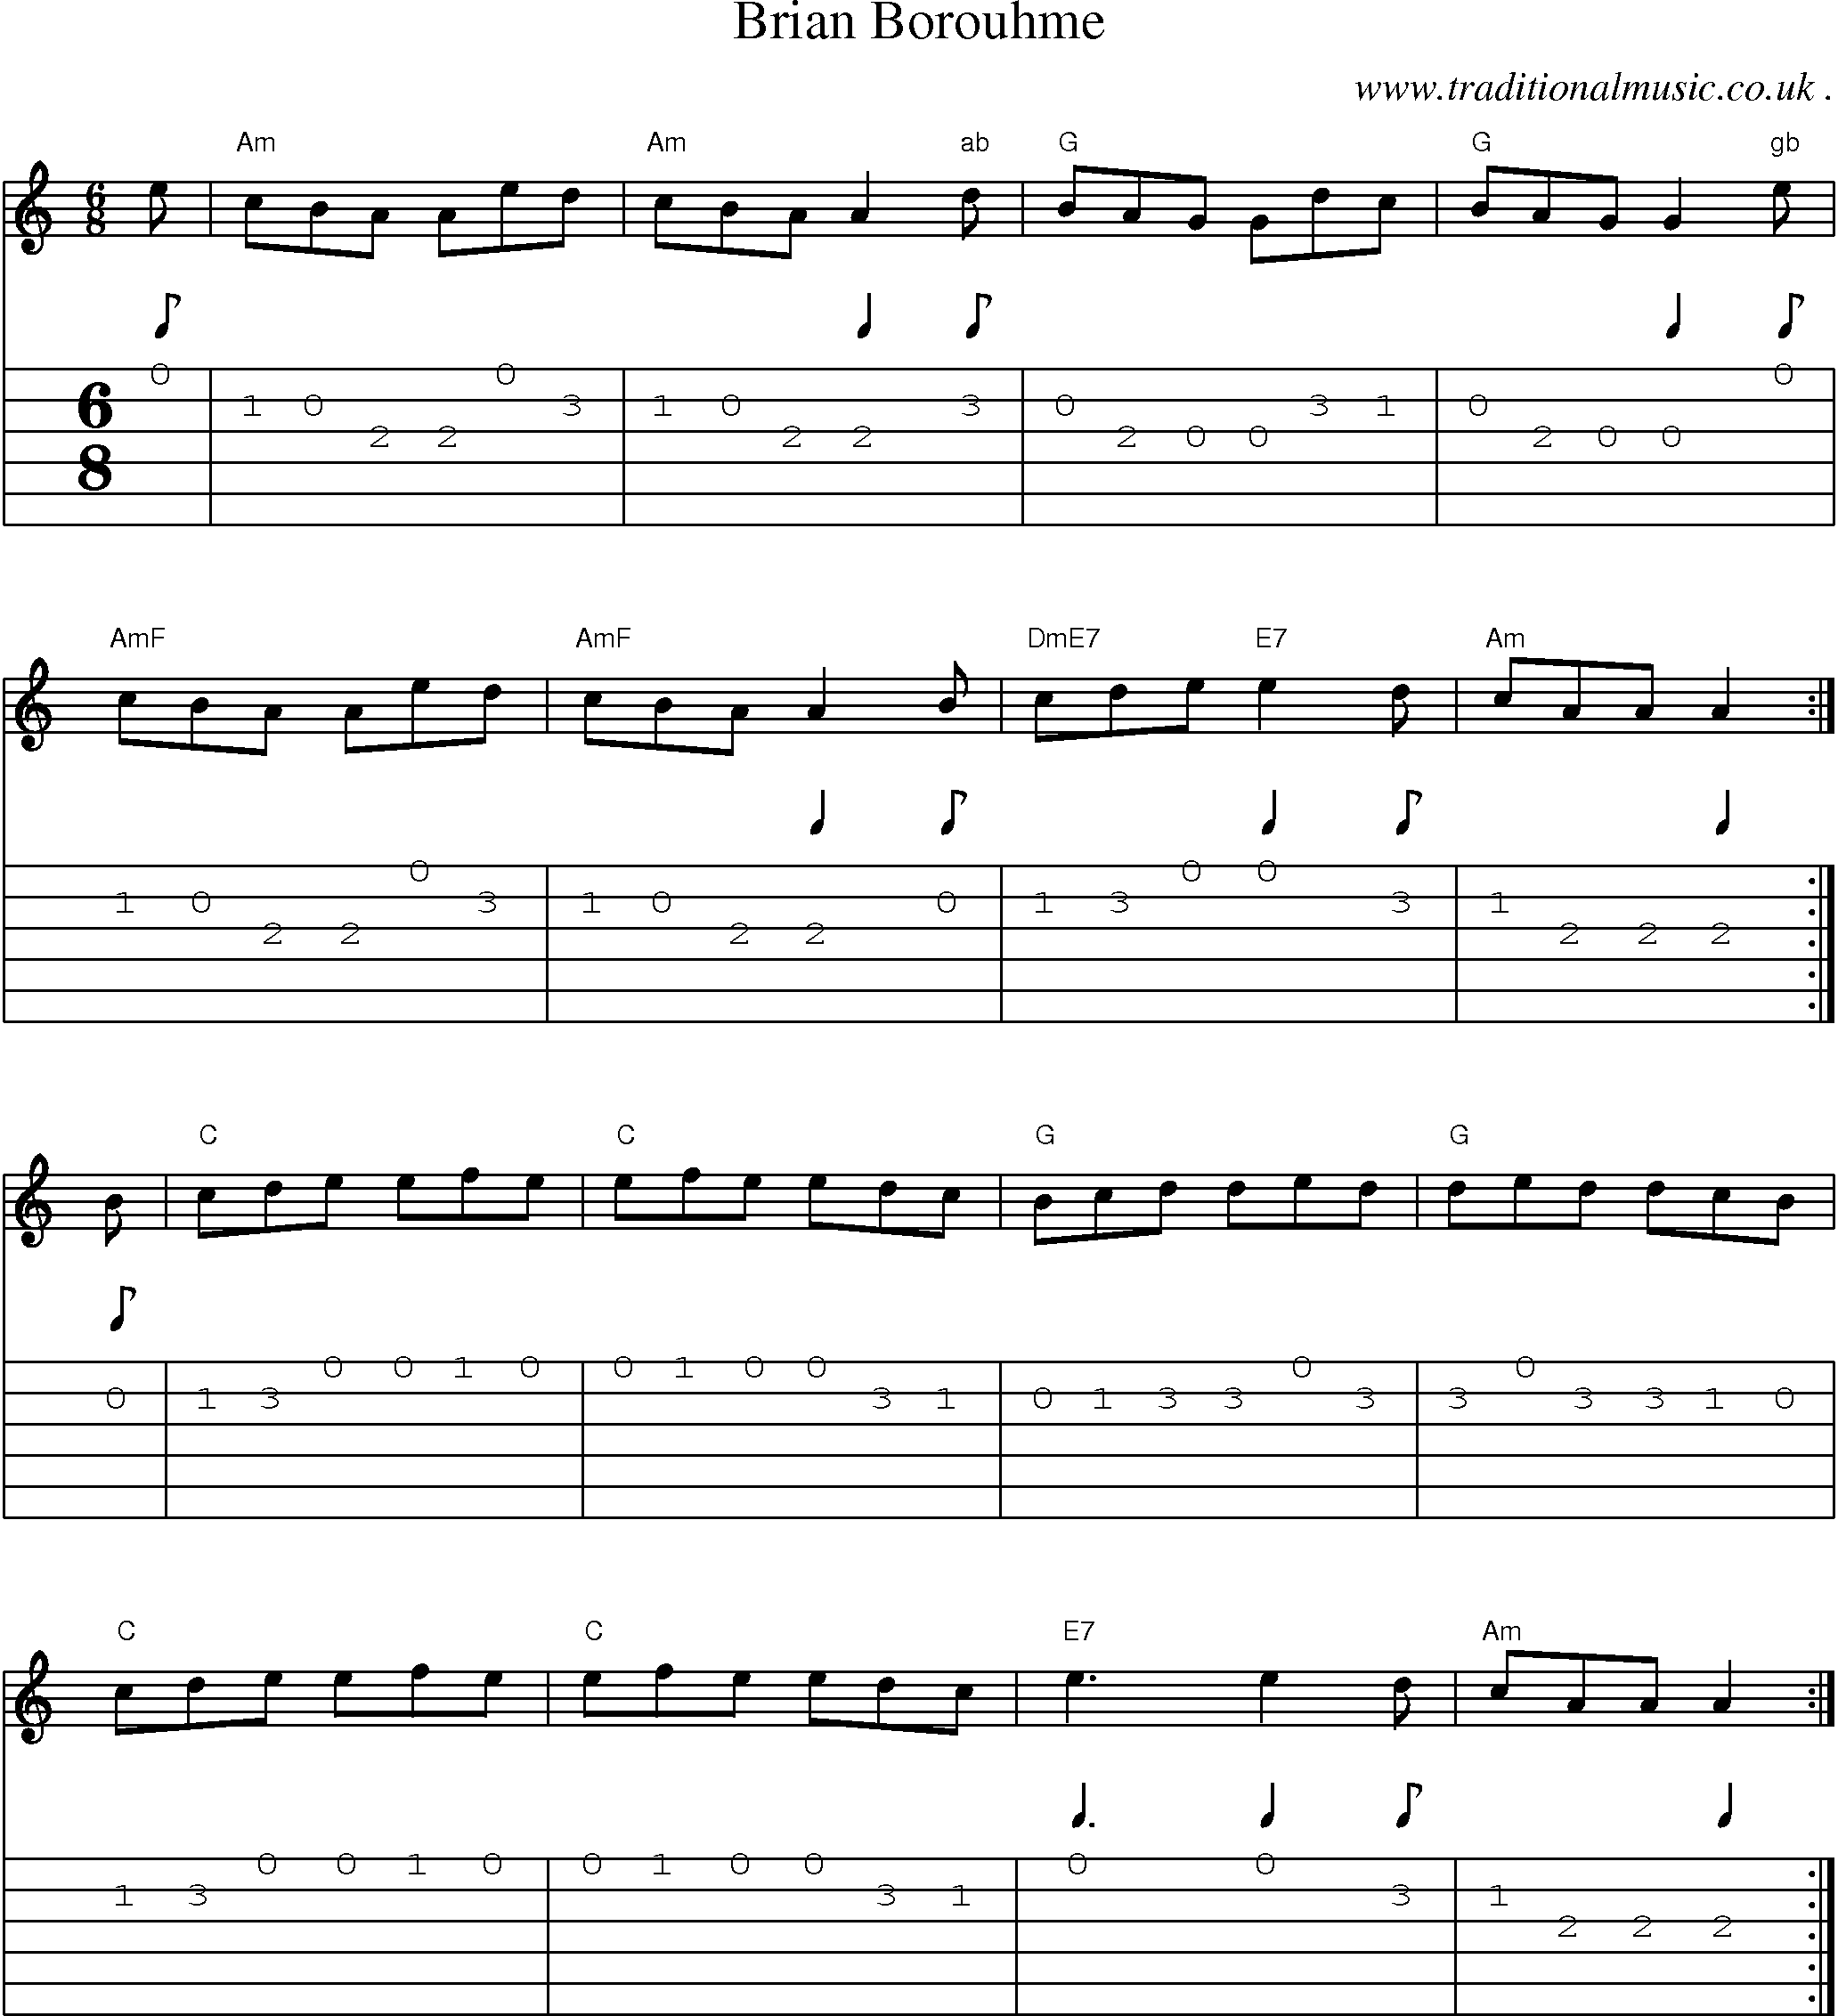 Sheet-Music and Guitar Tabs for Brian Borouhme